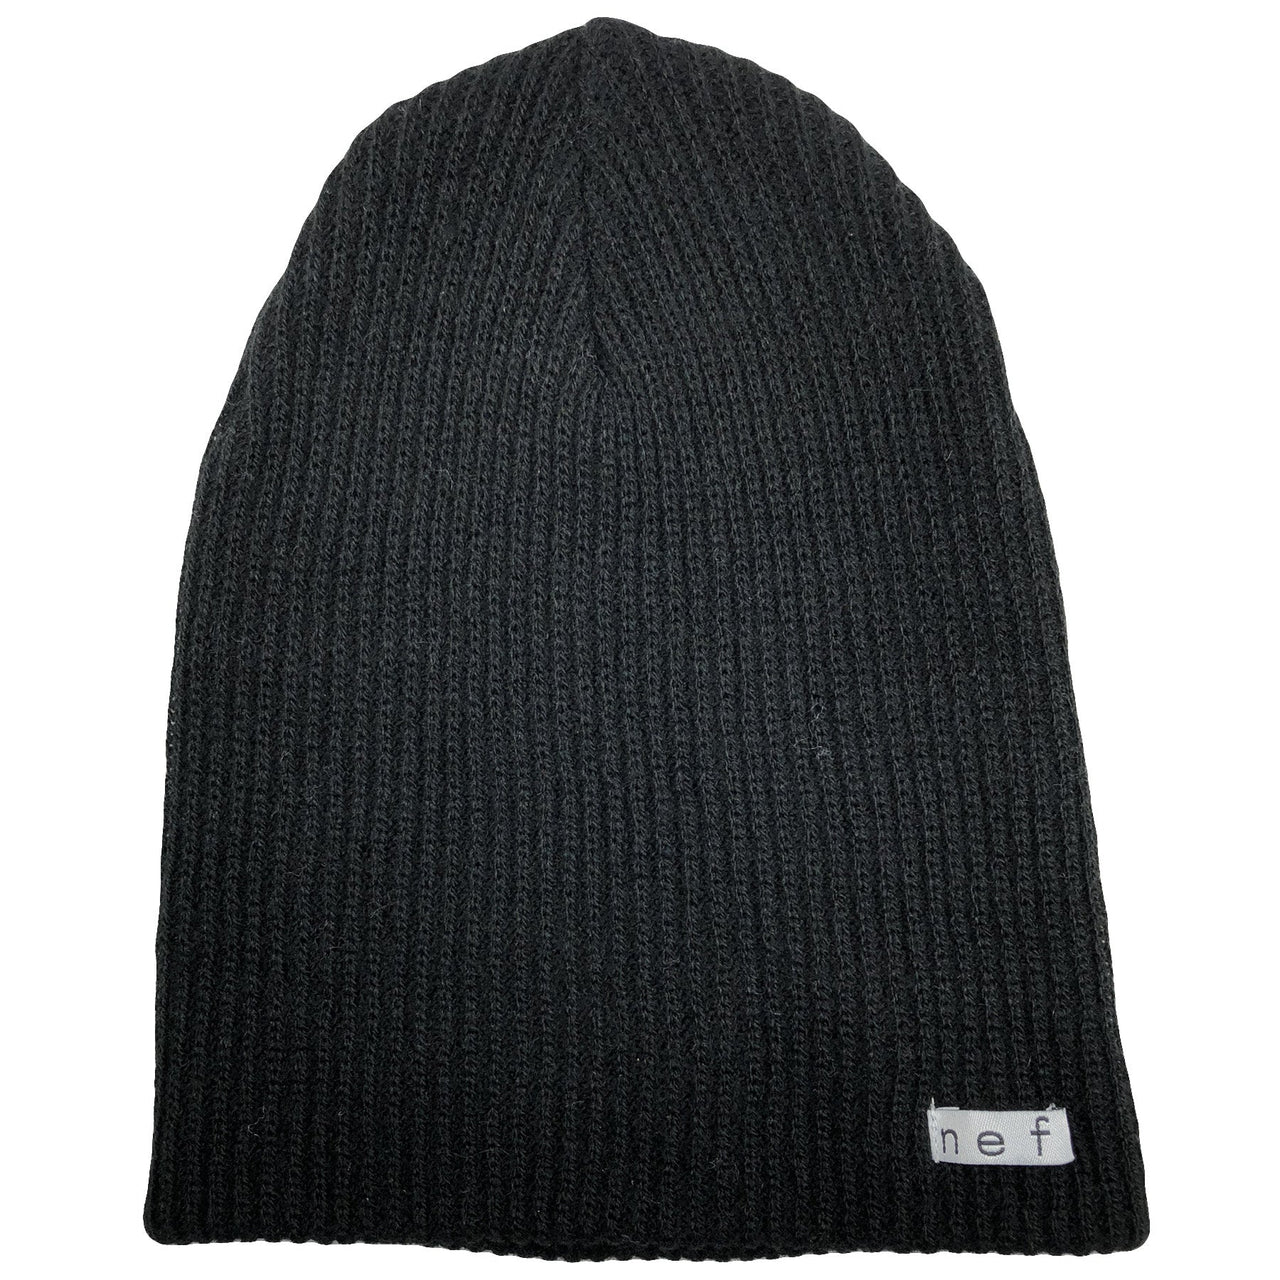 the black neff daily beanie is solid black with a loose knit material and the neff label stitched in white and black